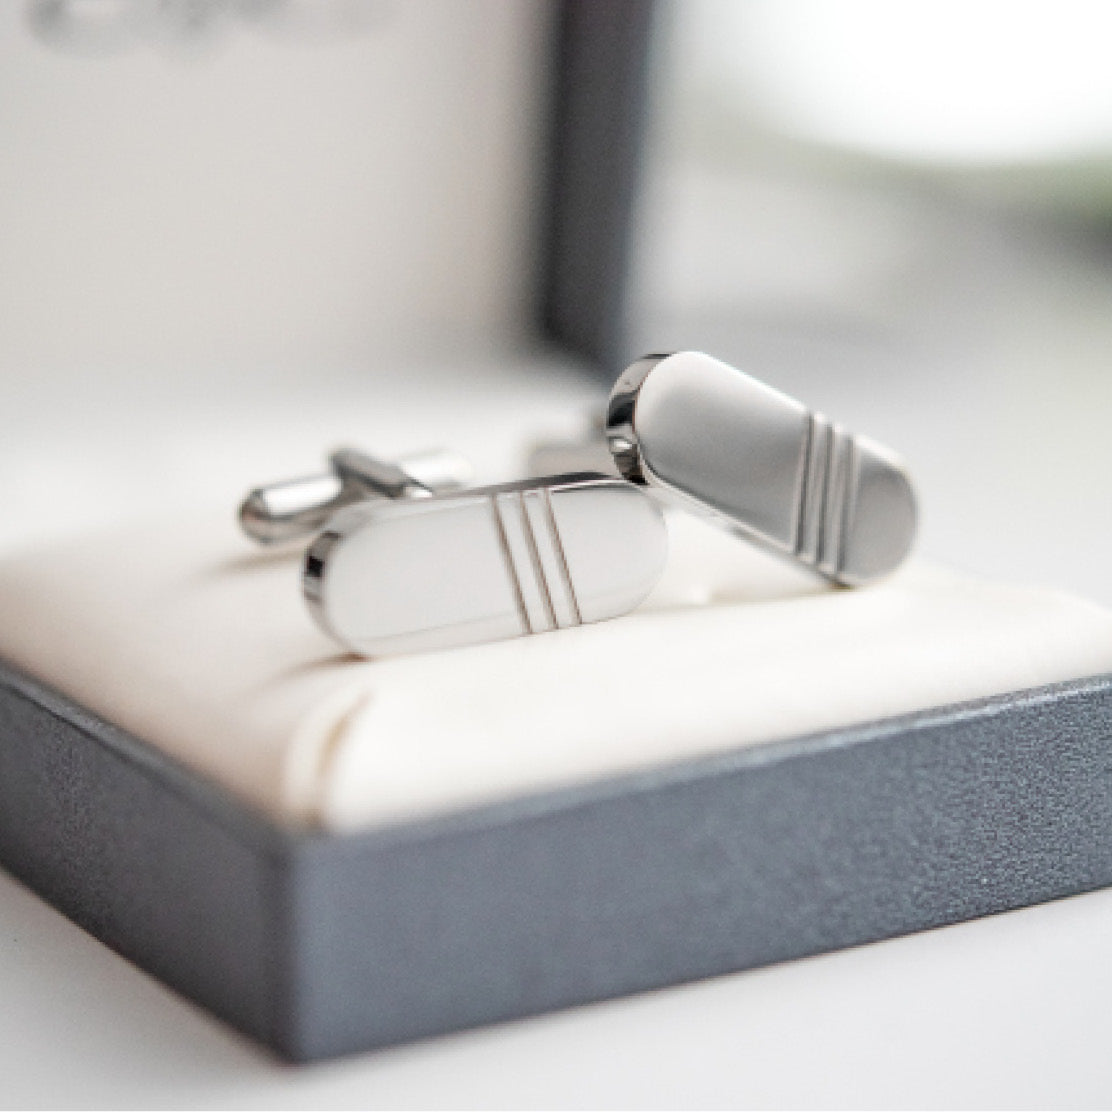 Capsule Shape Cuff Links with Diagonal Grooves Perfect for Weddings, Formal Events, or Father's Day Gift